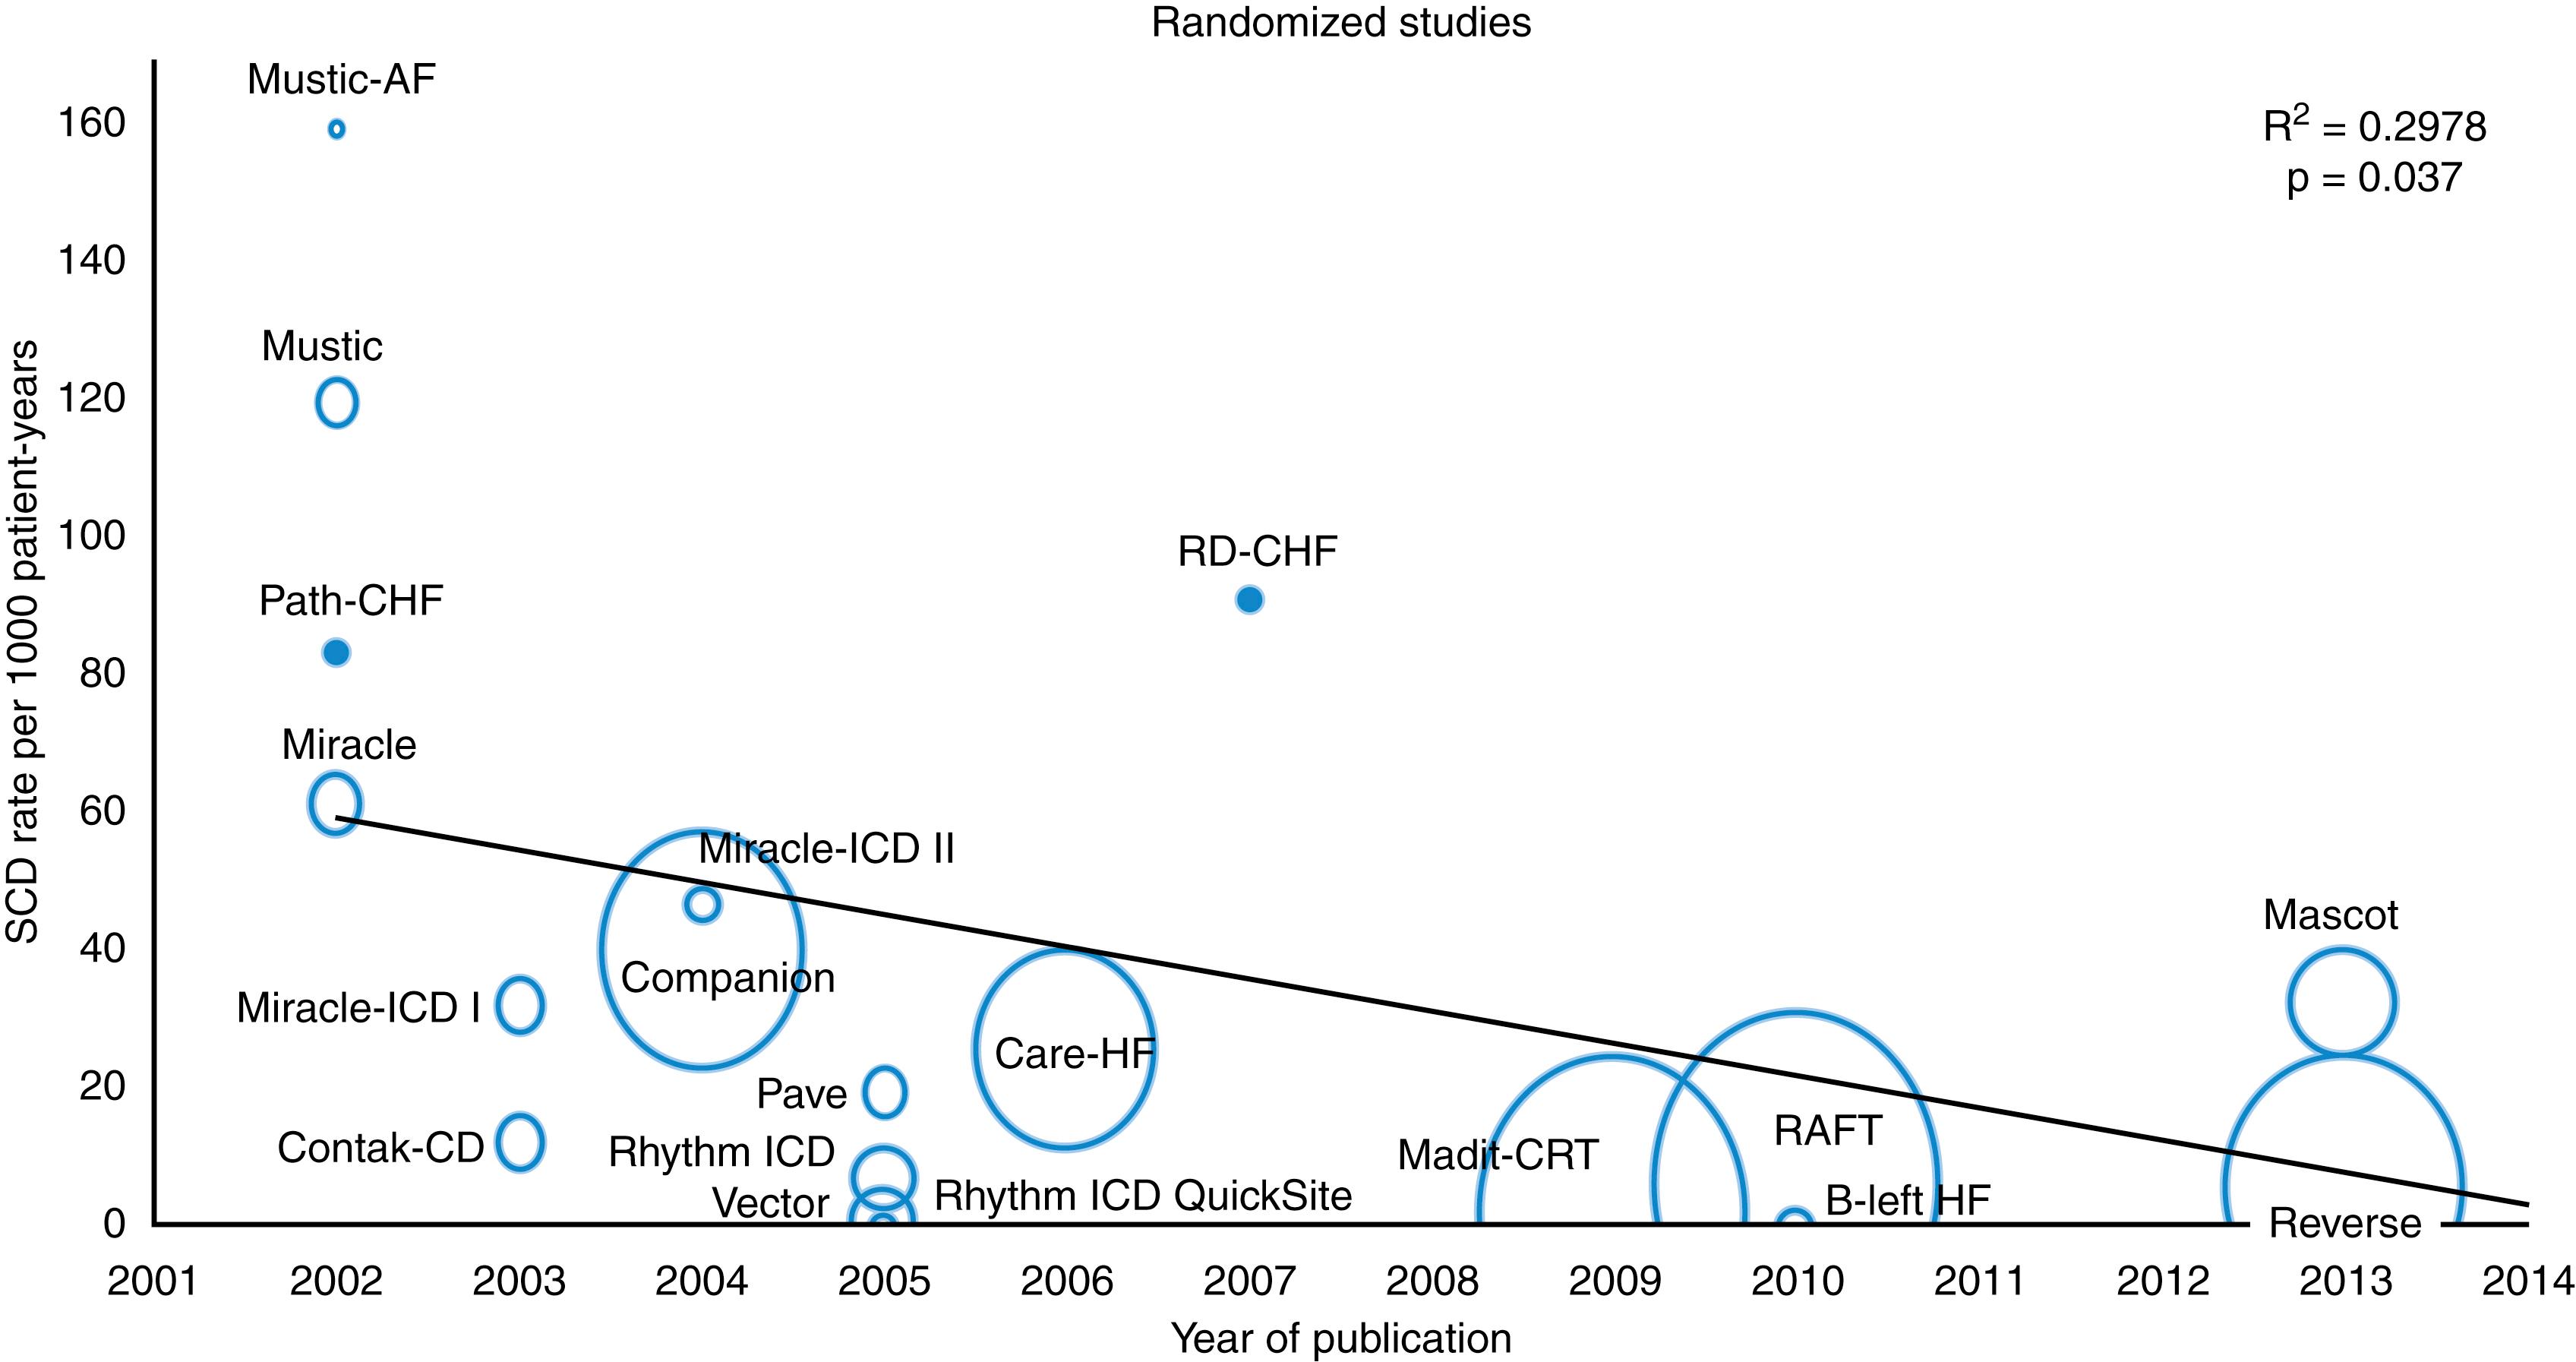 Fig. 87.1, Decline of sudden cardiac death rates in major randomized trials over time.